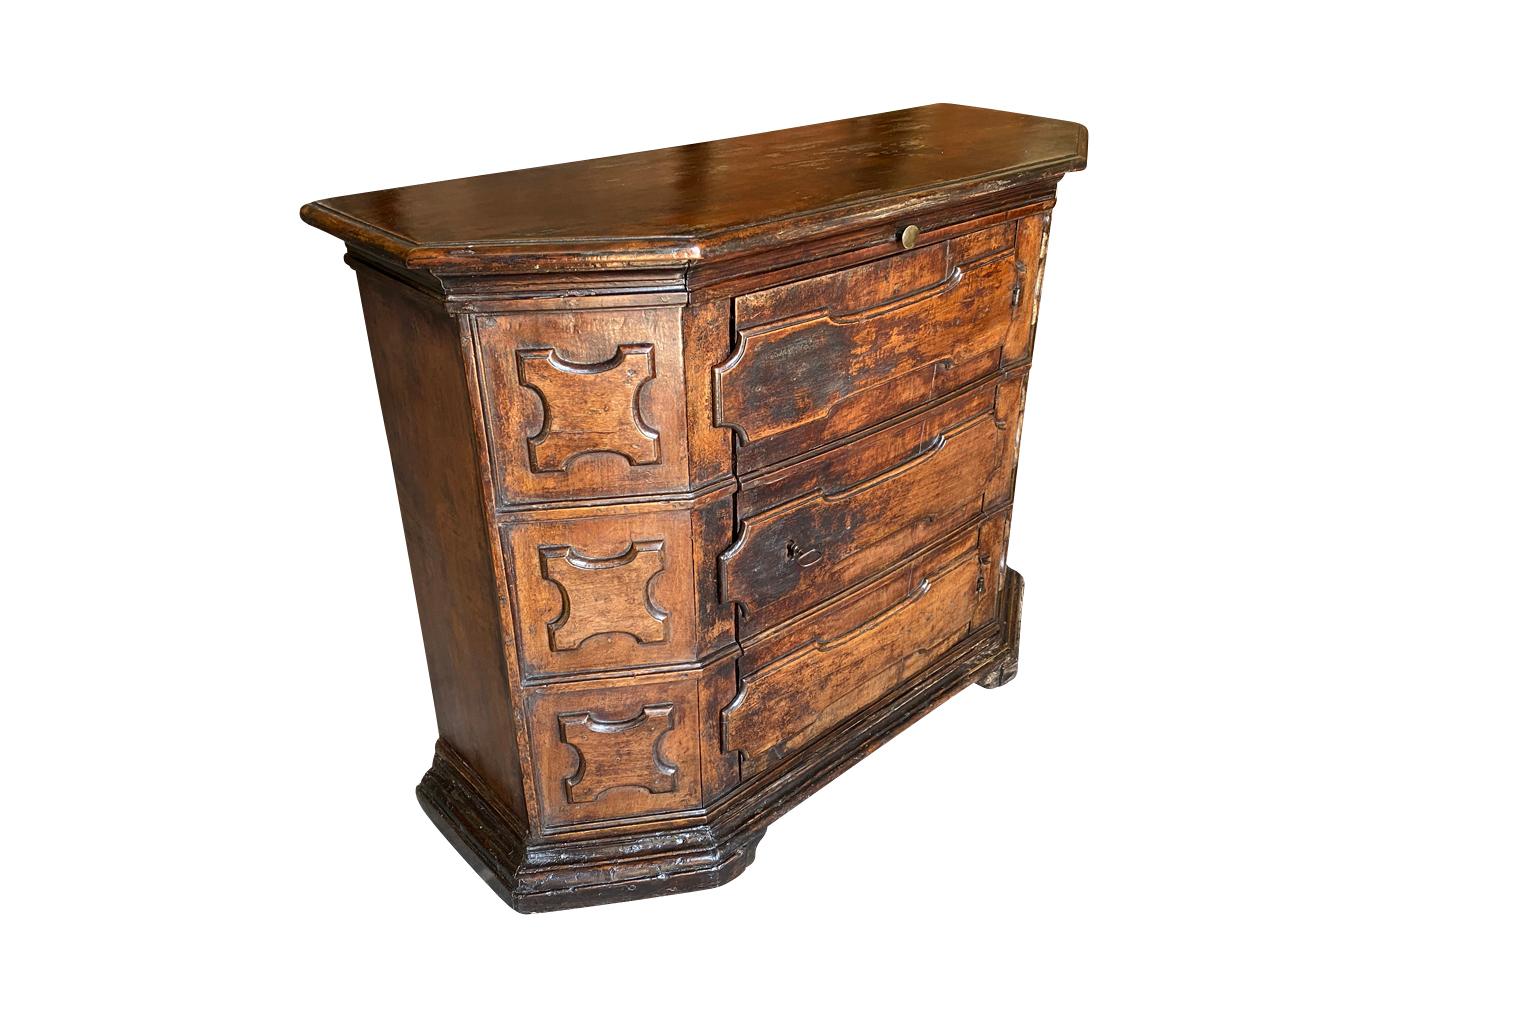 A very handsome 17th century Commode A Porte from Tuscany. Beautifully constructed in handsome walnut in the scantonata shape, a single drawer and a single door with interior shelving. A wonderful accent piece with stunning patina.